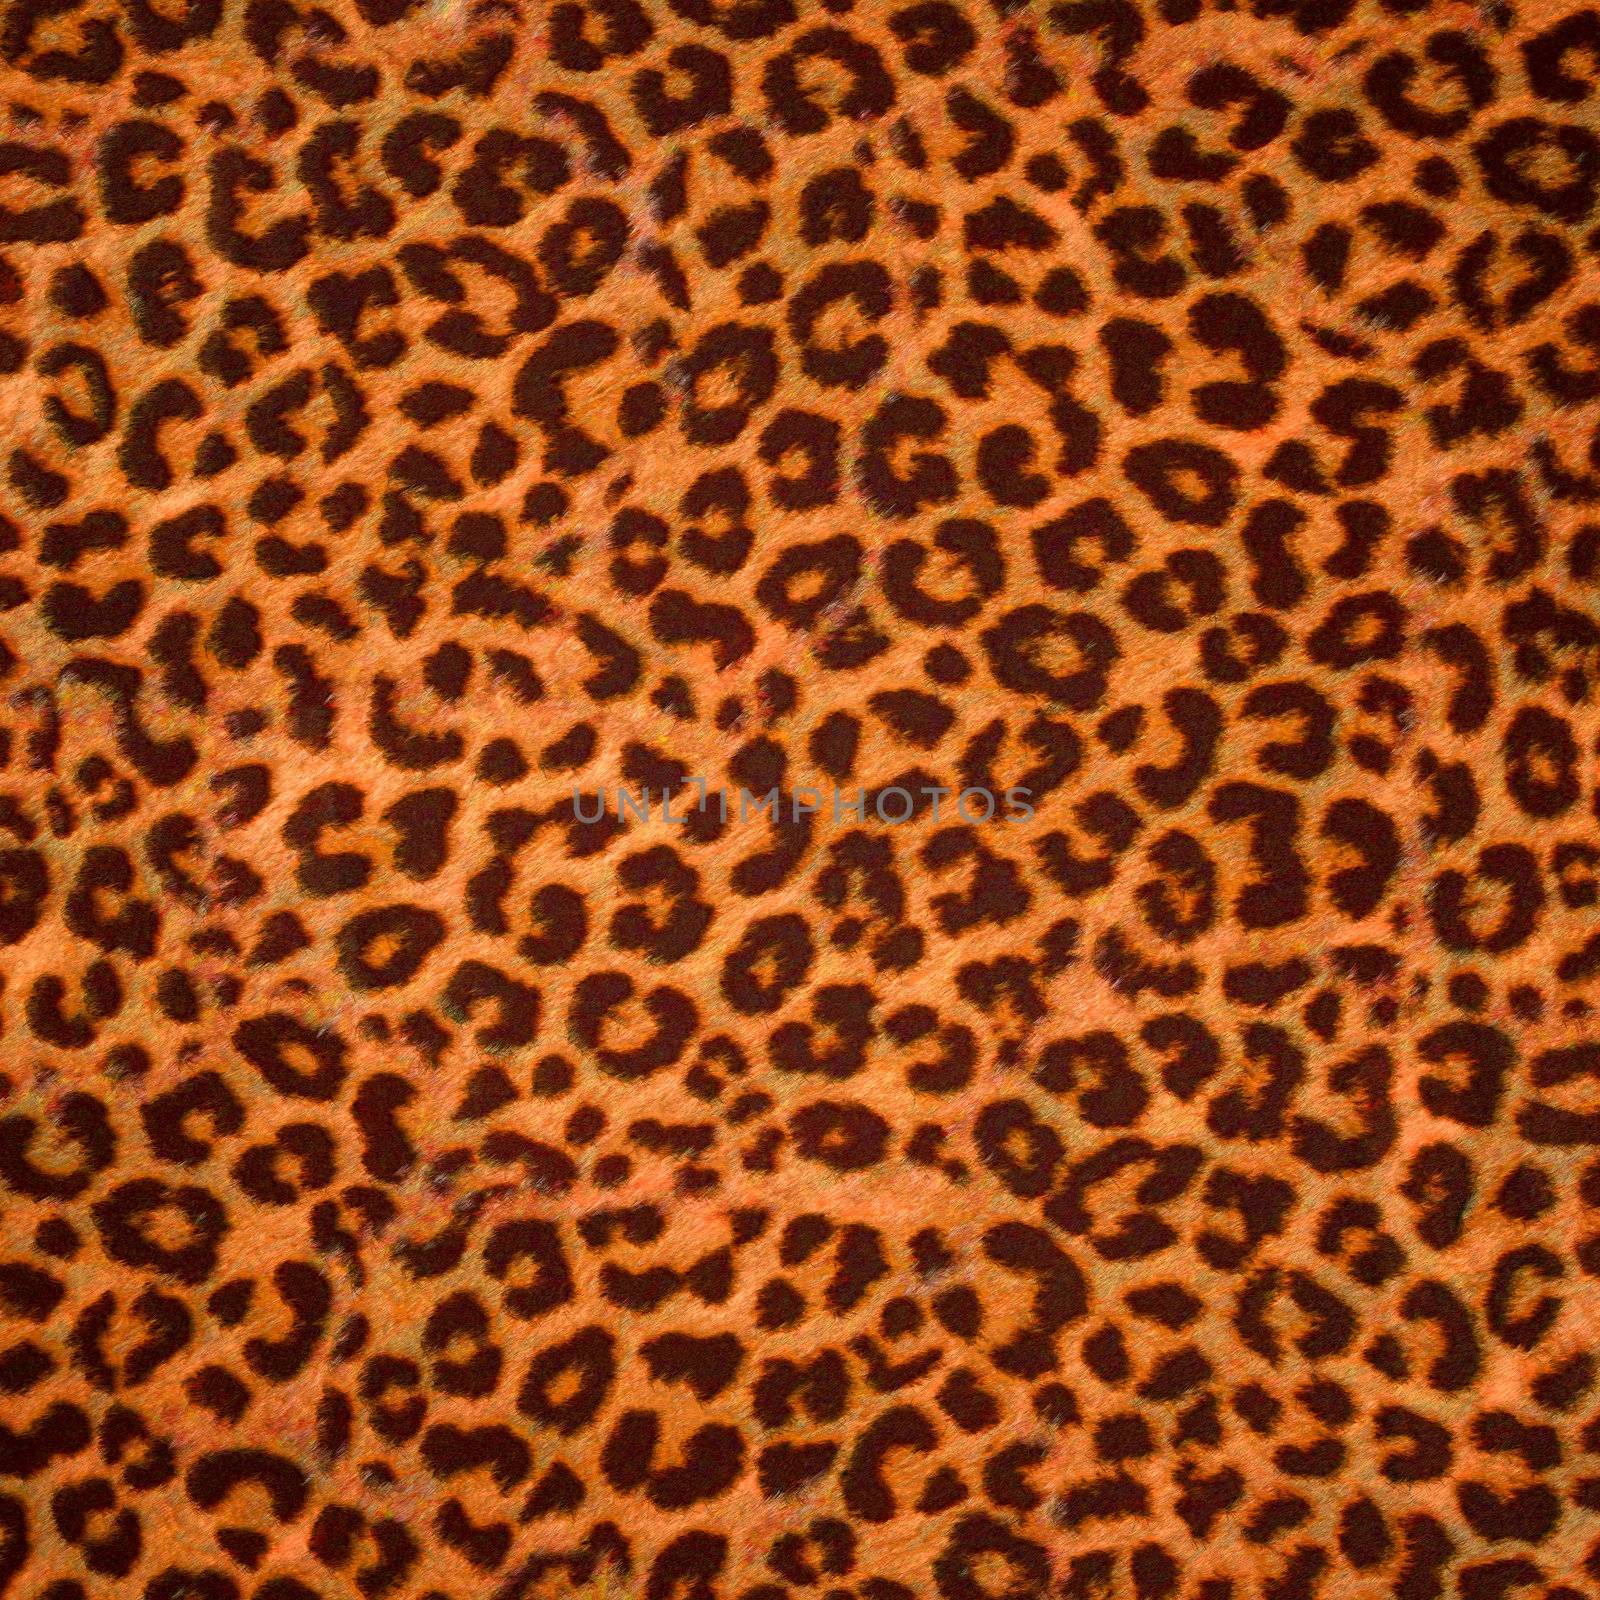 Leopard skin background or texture. Large resolution